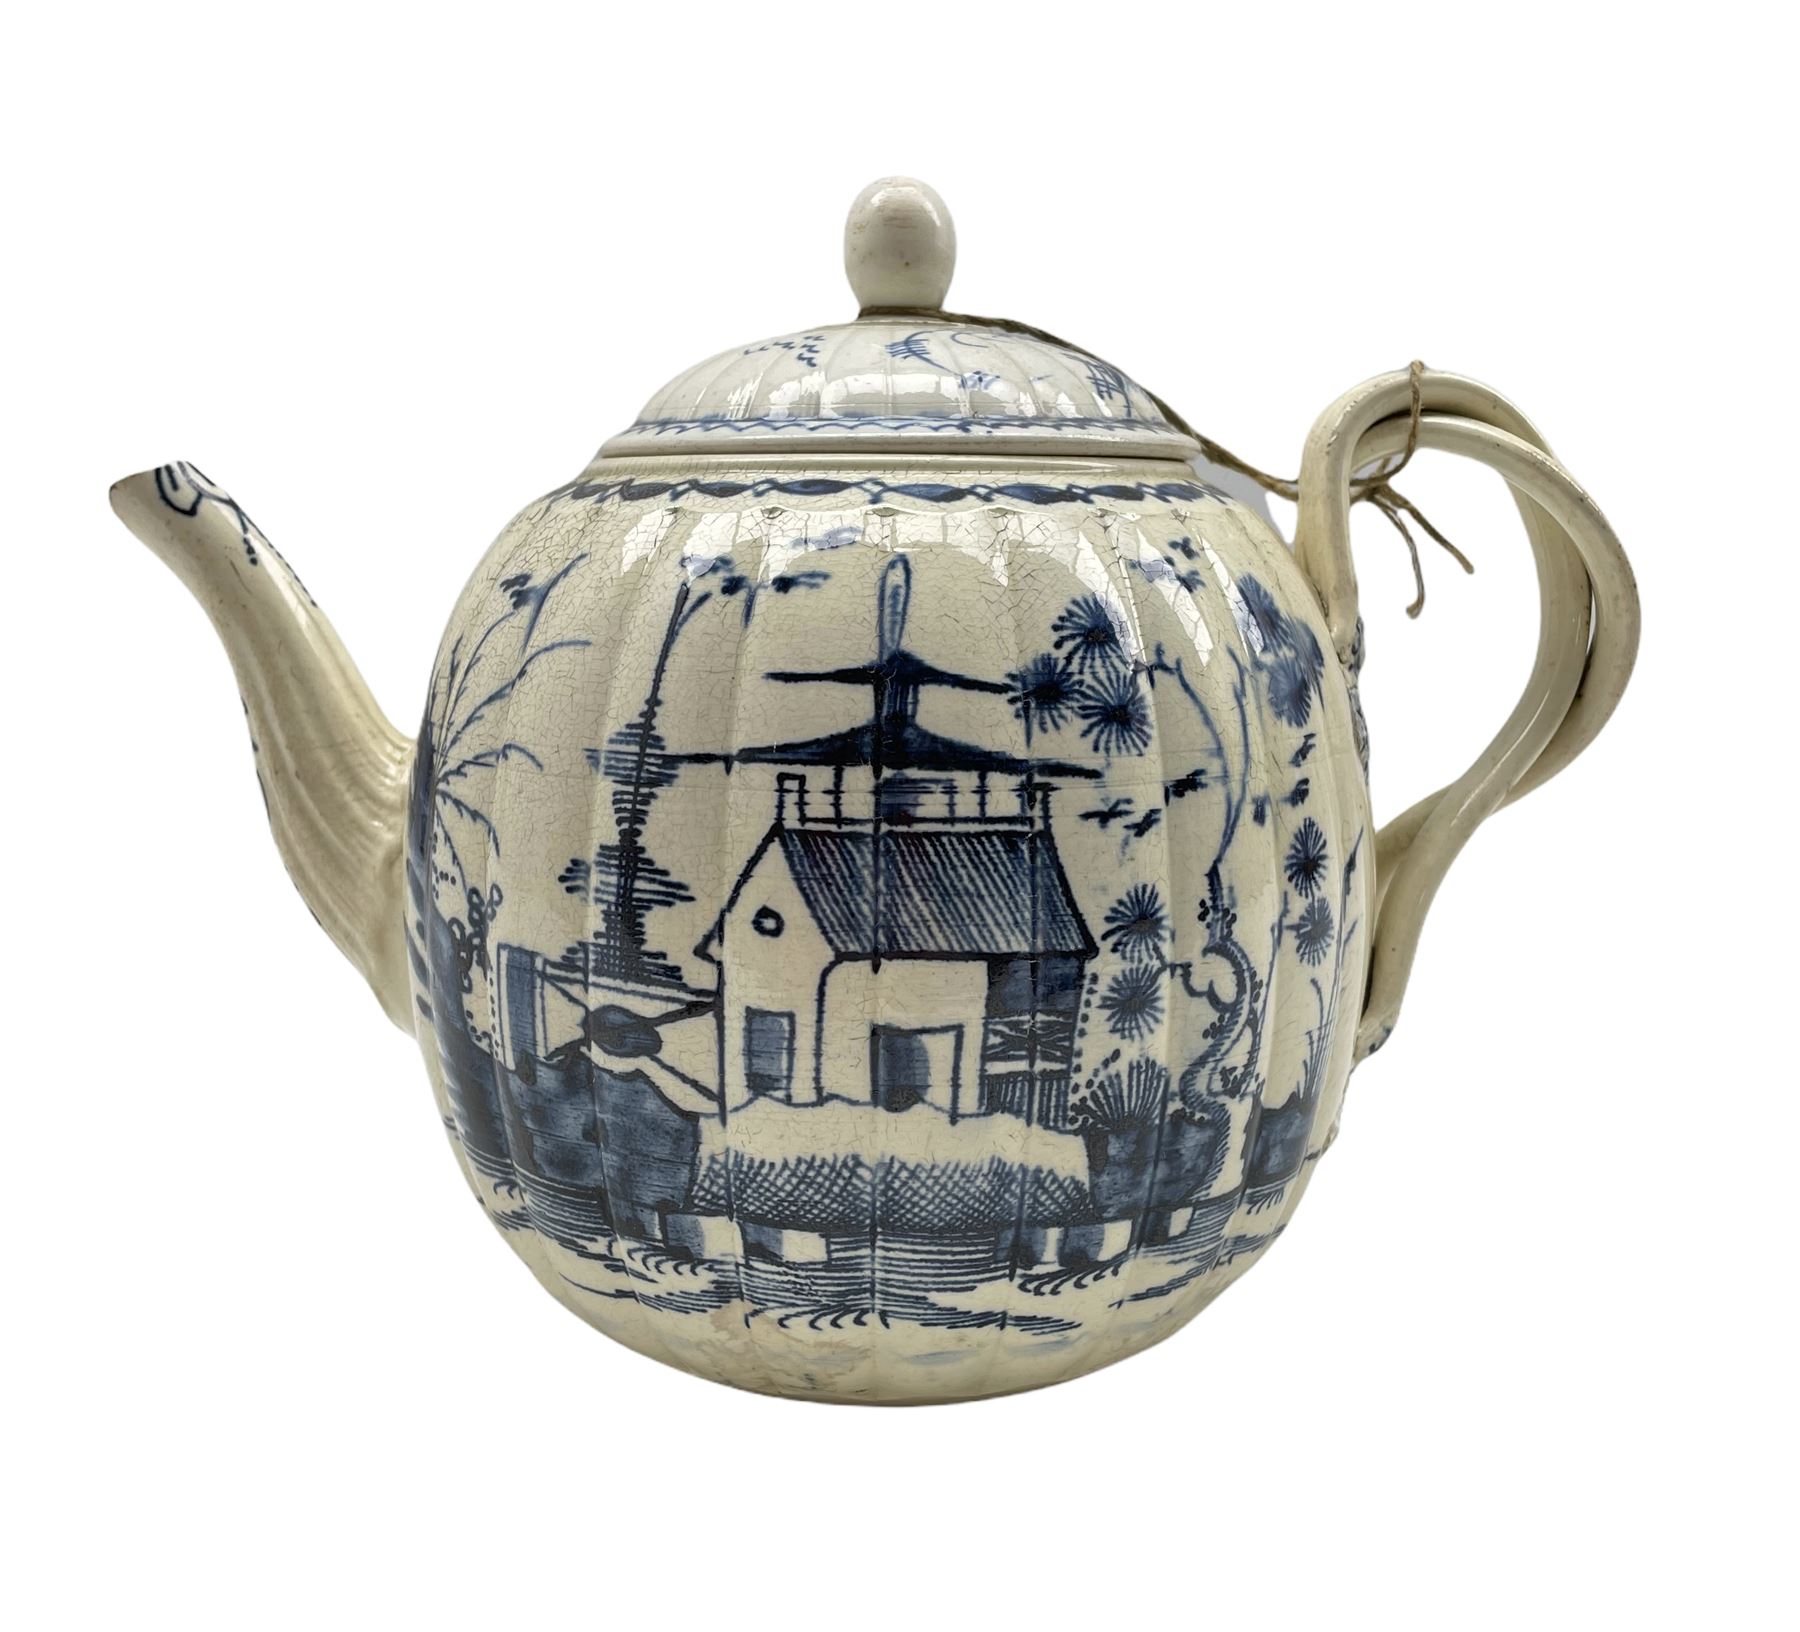 18th century Creamware teapot of melon form with blue chinoiserie design and strapwork handle